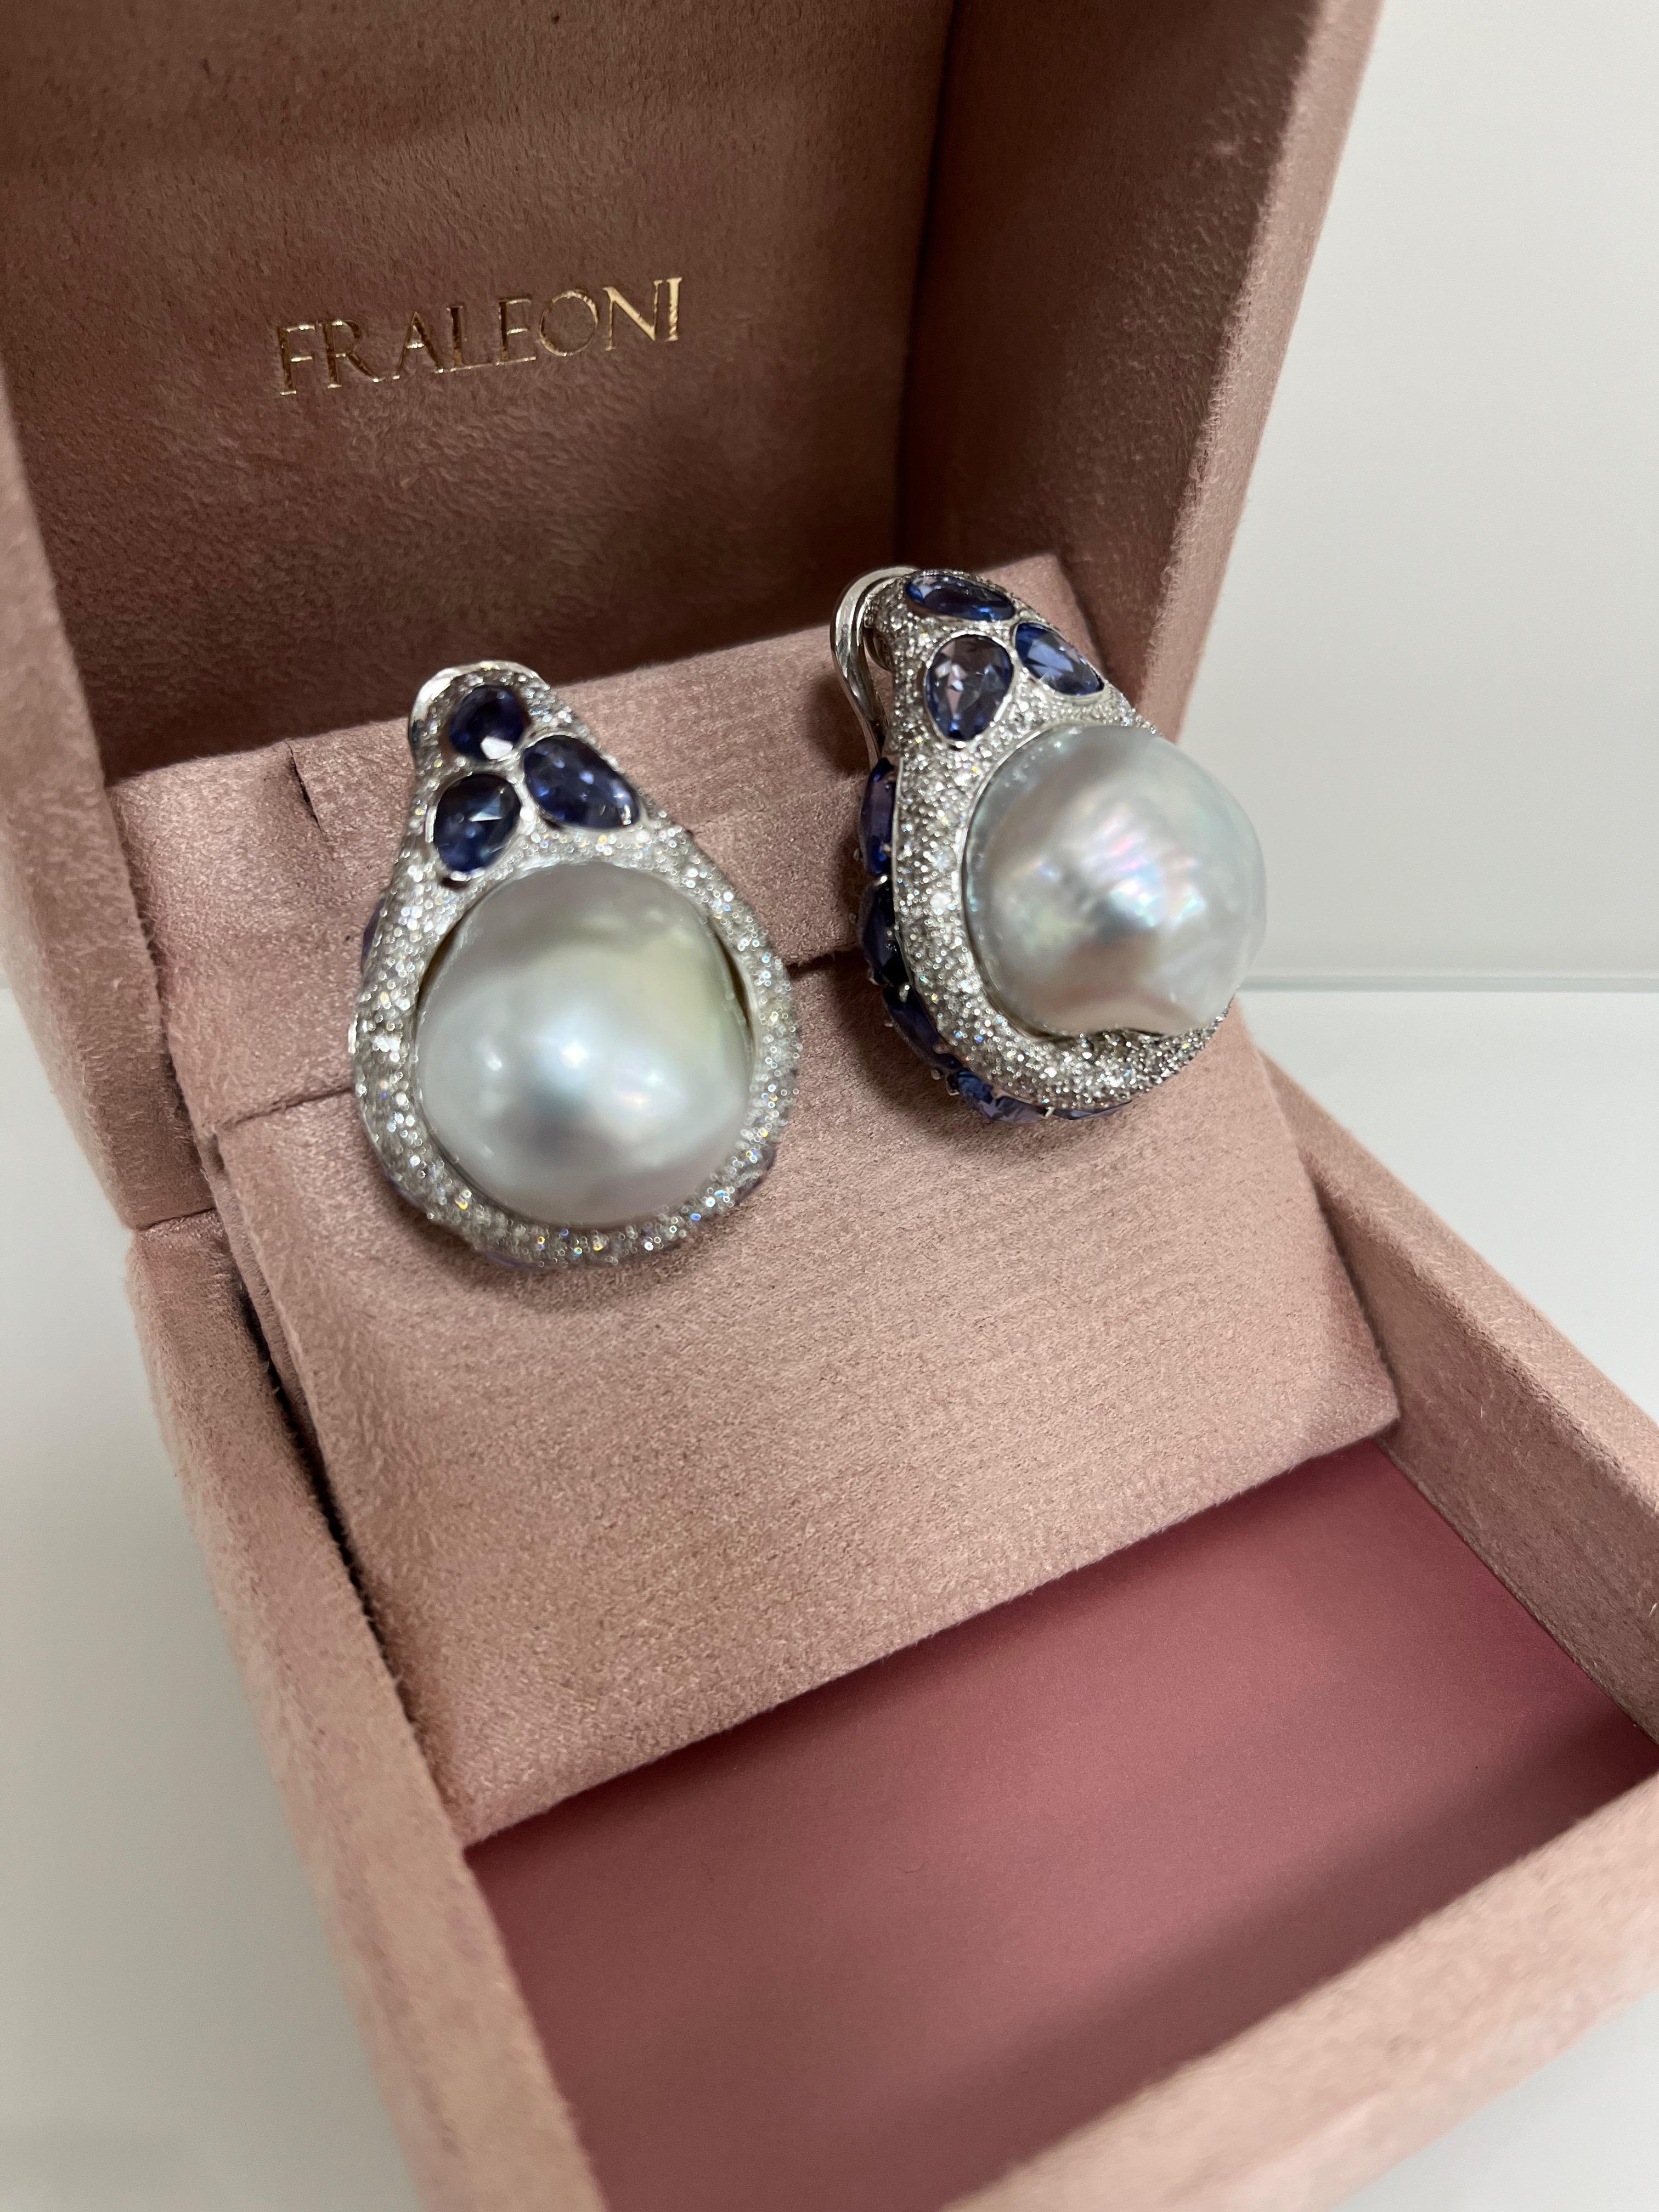 18 kt. gold earrings with 6.10 ct. of round-cut diamonds ( H-I color - VVS1-VVS2 ), 13.80 ct. of blue double rose-cut sapphires, 2 baroque pearls.
This one of a kind earrings are hand-made in Italy.
Baroque pearl size is 17.00 mm. ca.
Length 3.60